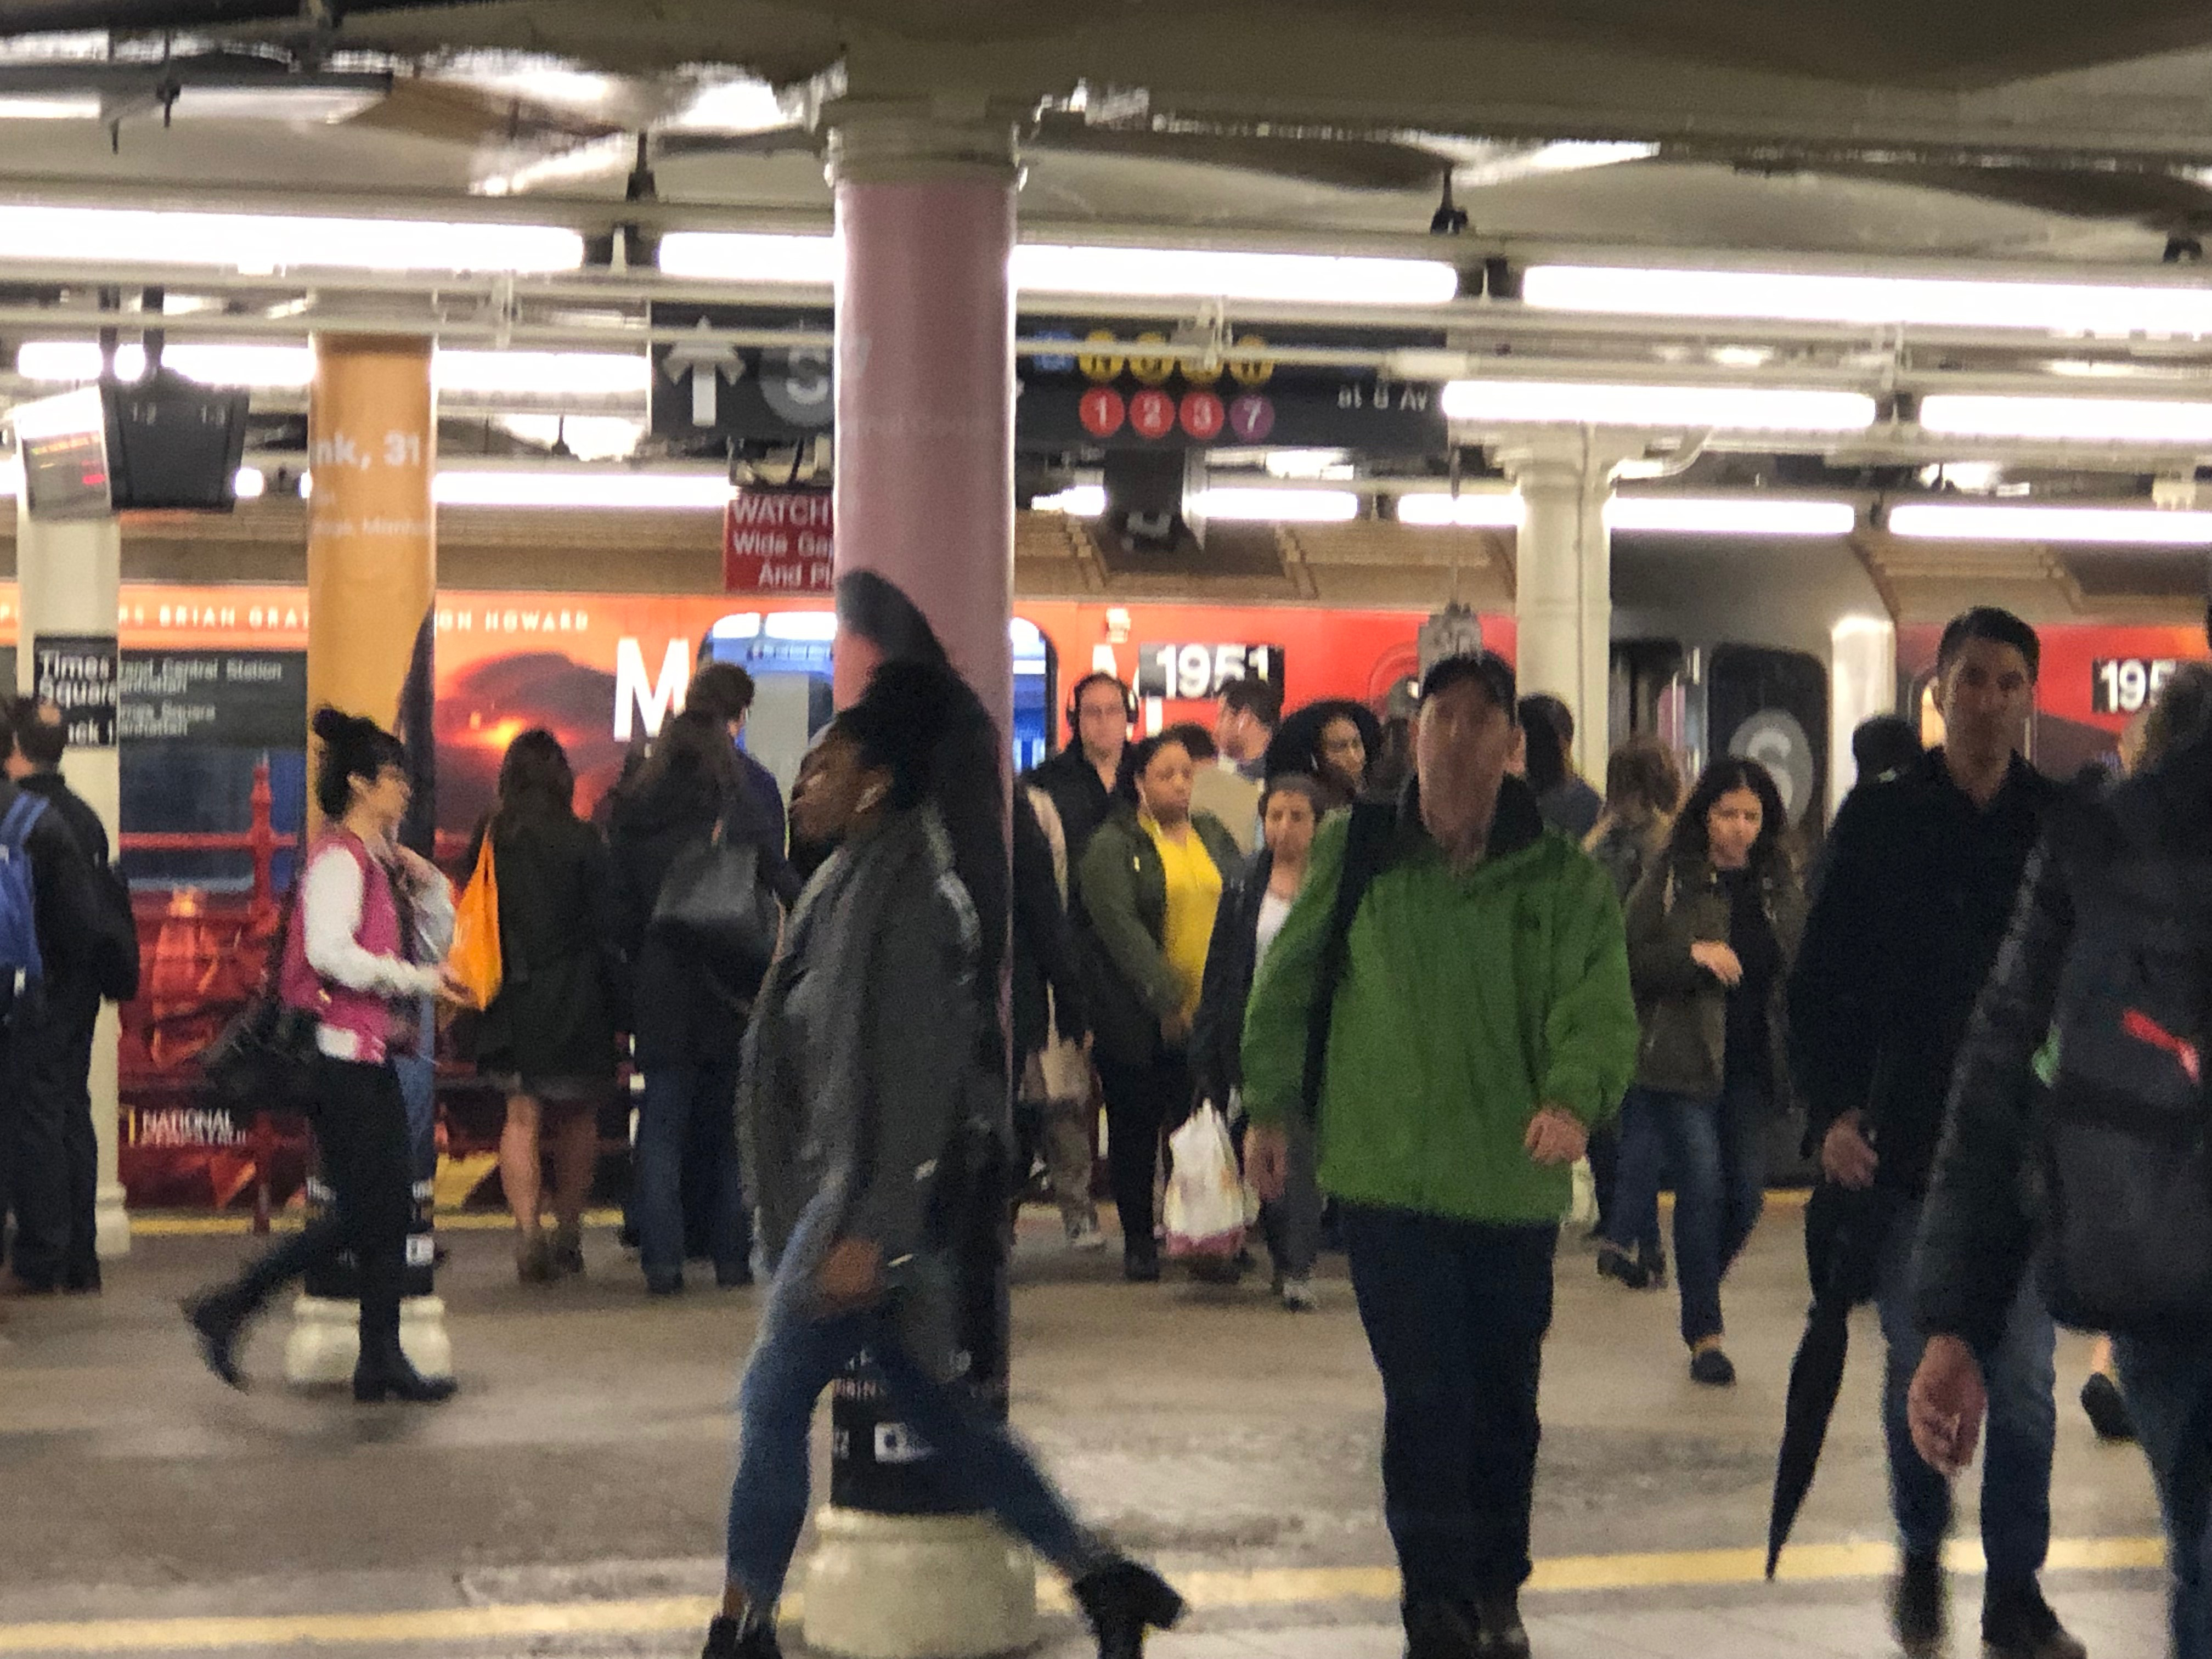 Commuters awaiting the shuttle train at Times Square